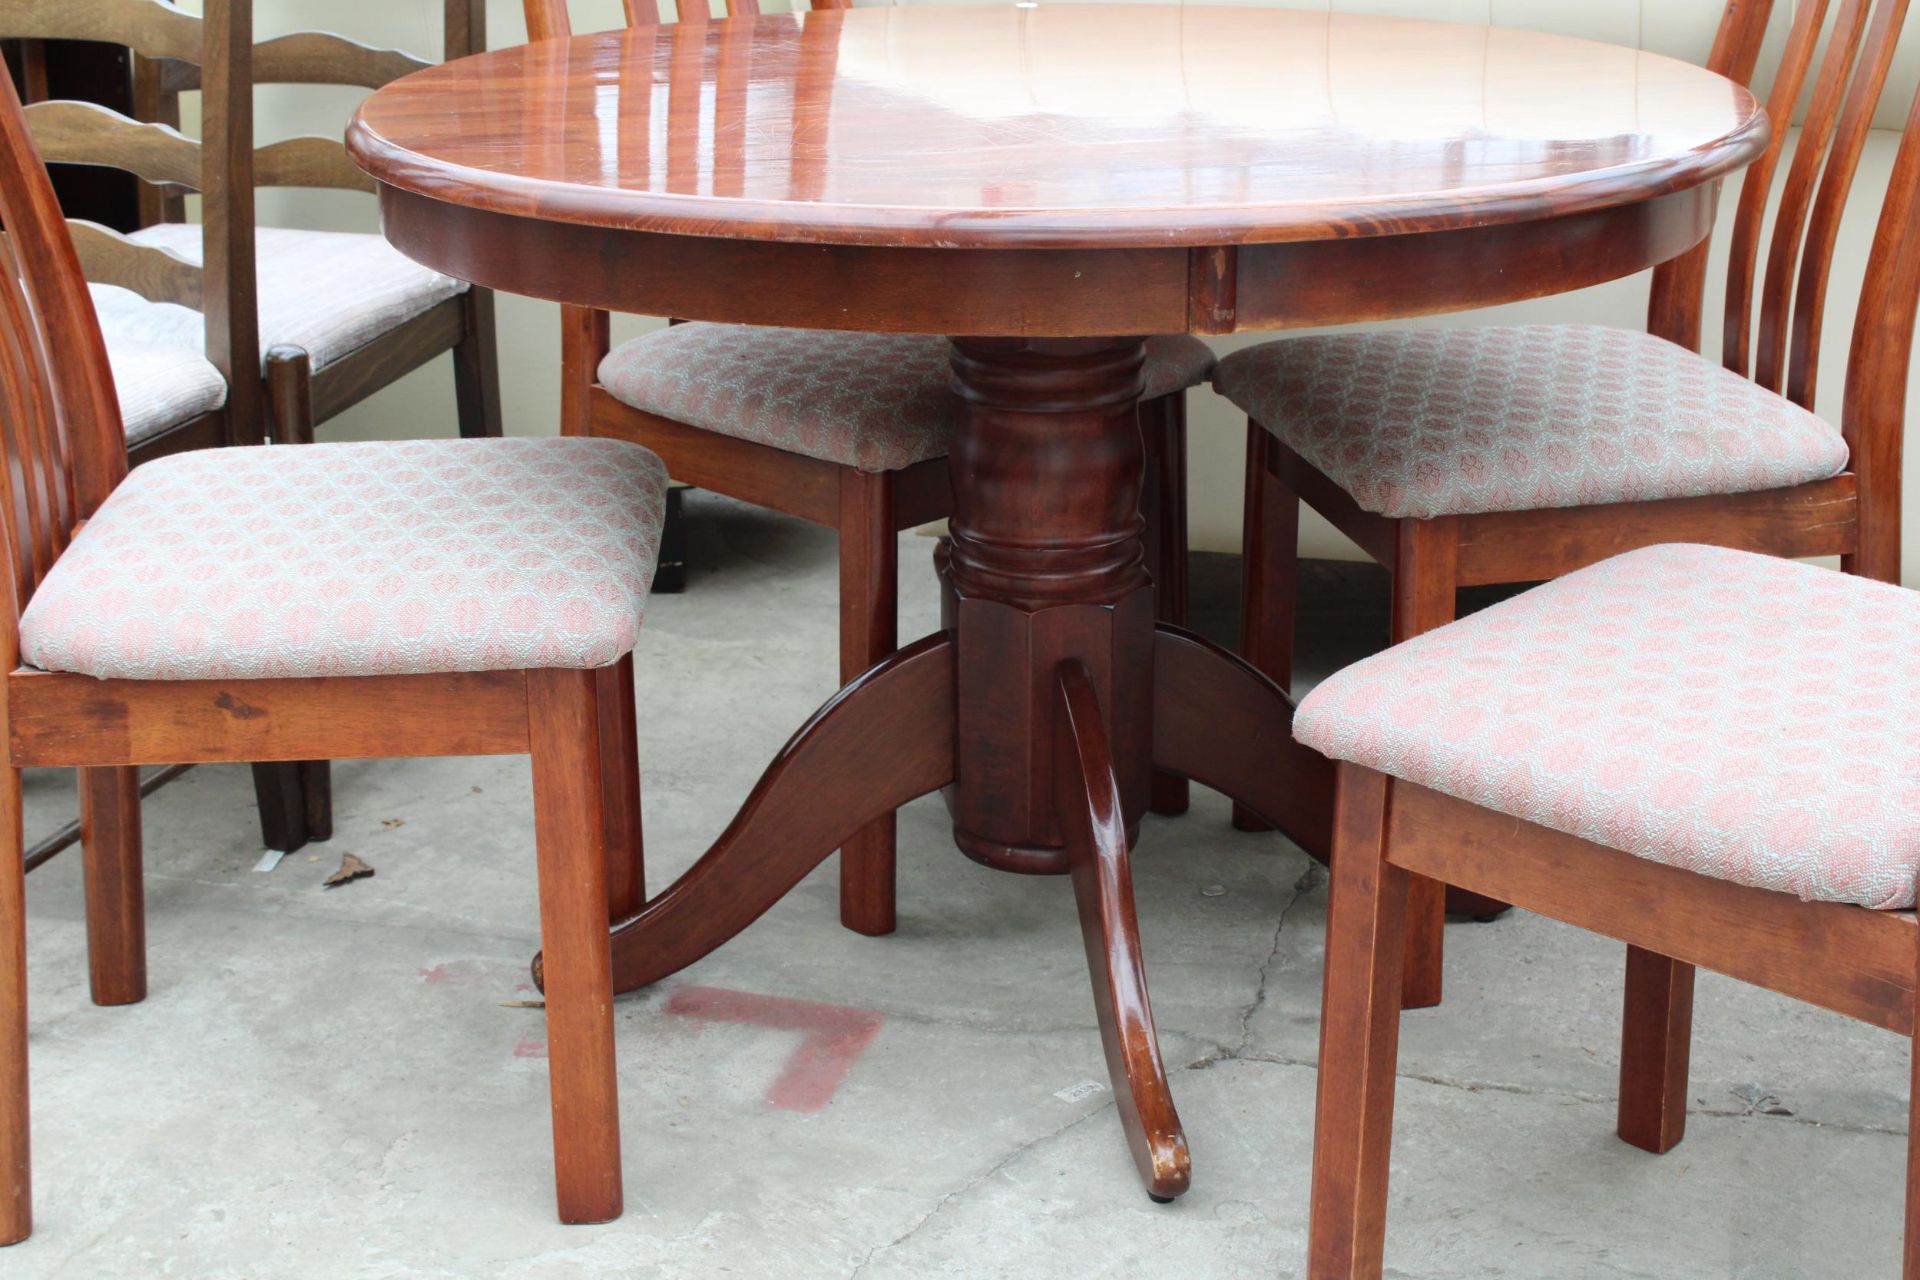 A MODERN POLISHED 42" DIAMETER DINING TABLE AND FOUR CHAIRS - Image 3 of 4